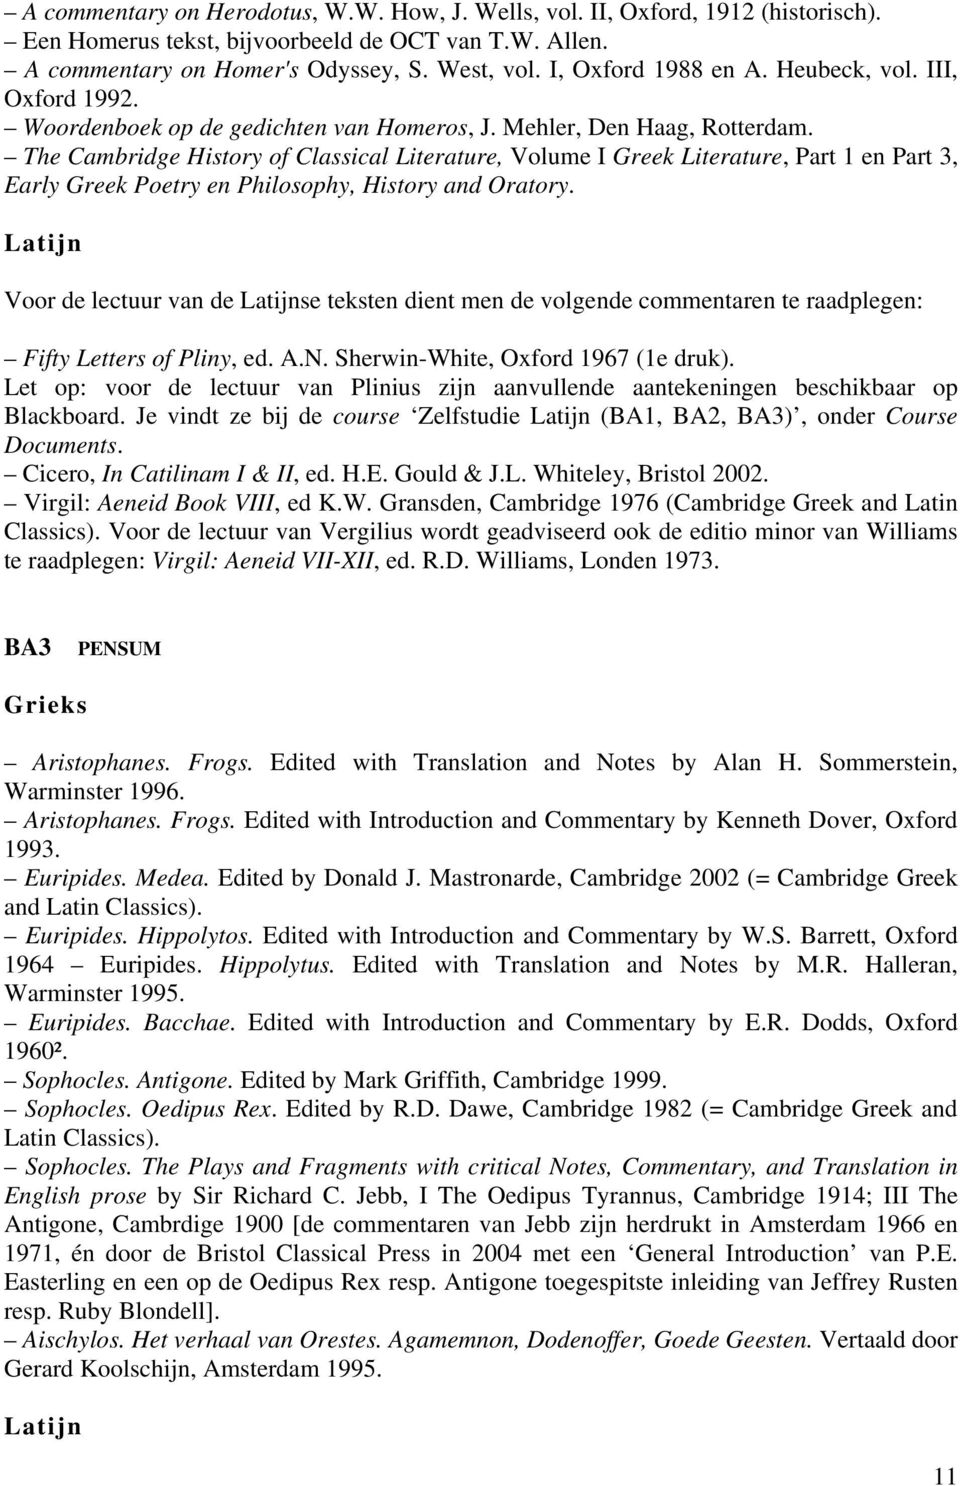 The Cambridge History of Classical Literature, Volume I Greek Literature, Part 1 en Part 3, Early Greek Poetry en Philosophy, History and Oratory.